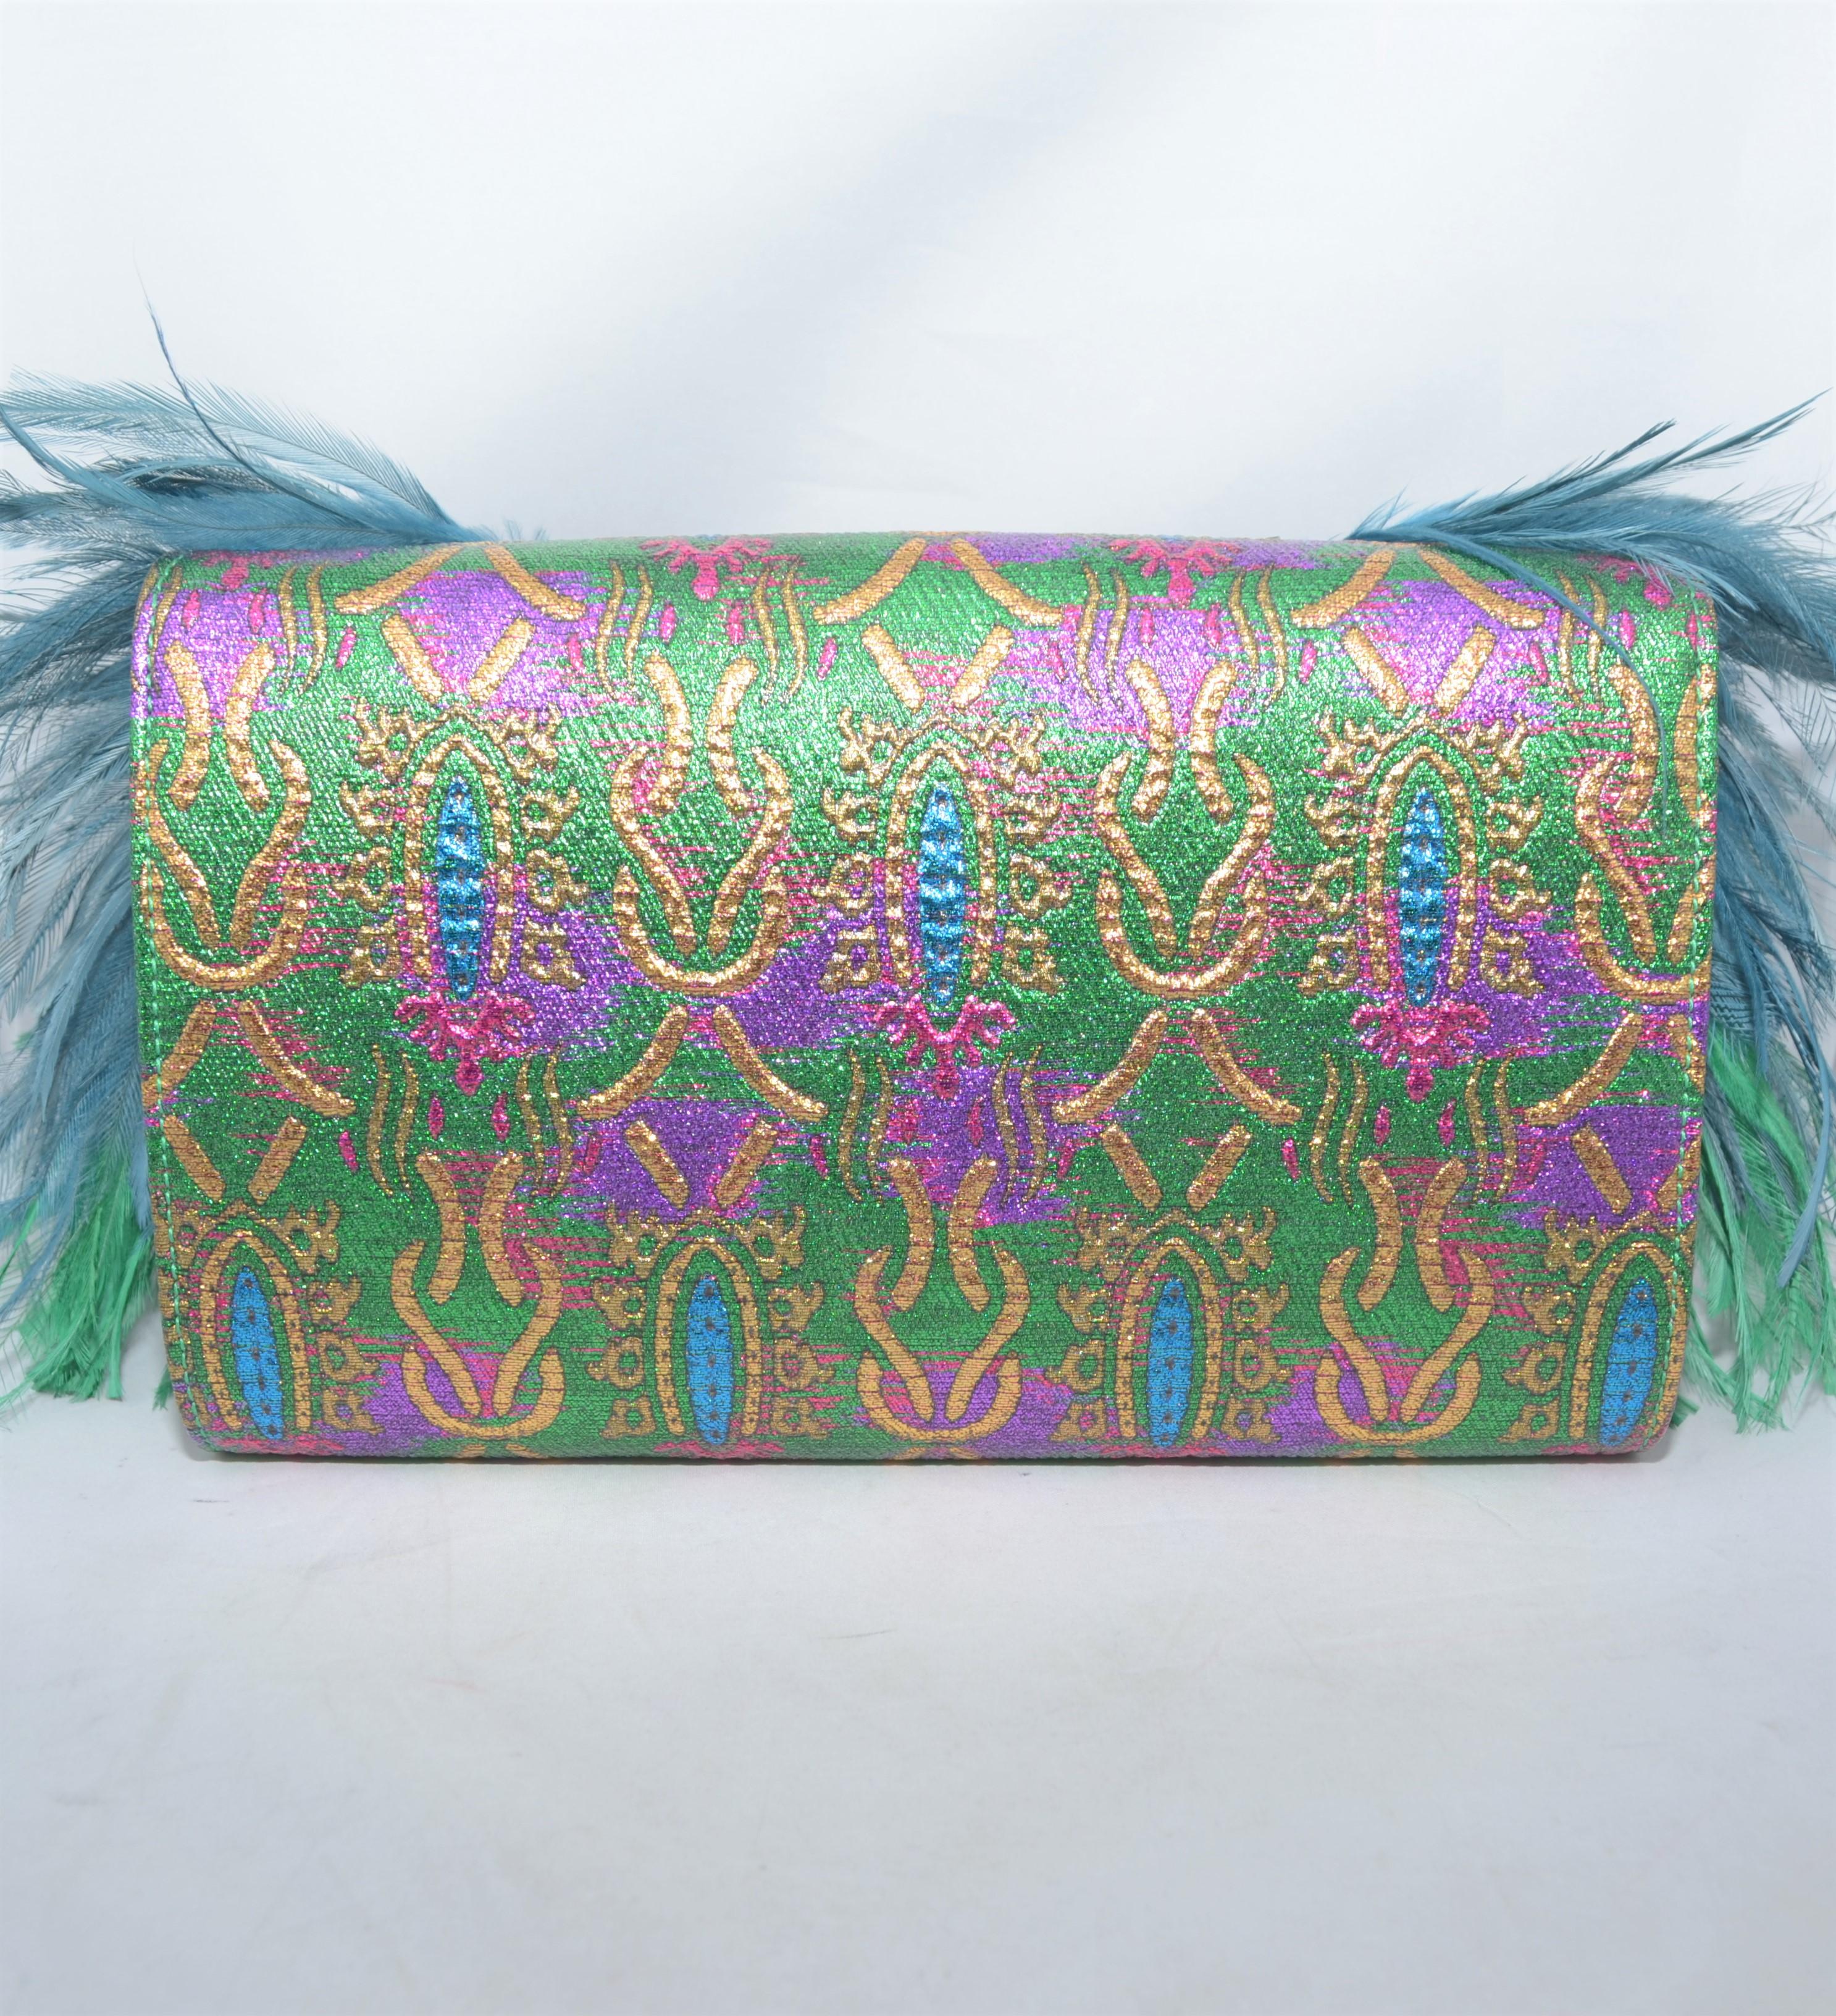 Gucci clutch is featured in a blue/green iridescent color on brocade with rhinestone embellishing that creates the image of a peacock, and feathers that adorn the sides of the clutch. Fully lined clutch with an optional brass-tone chain handle.